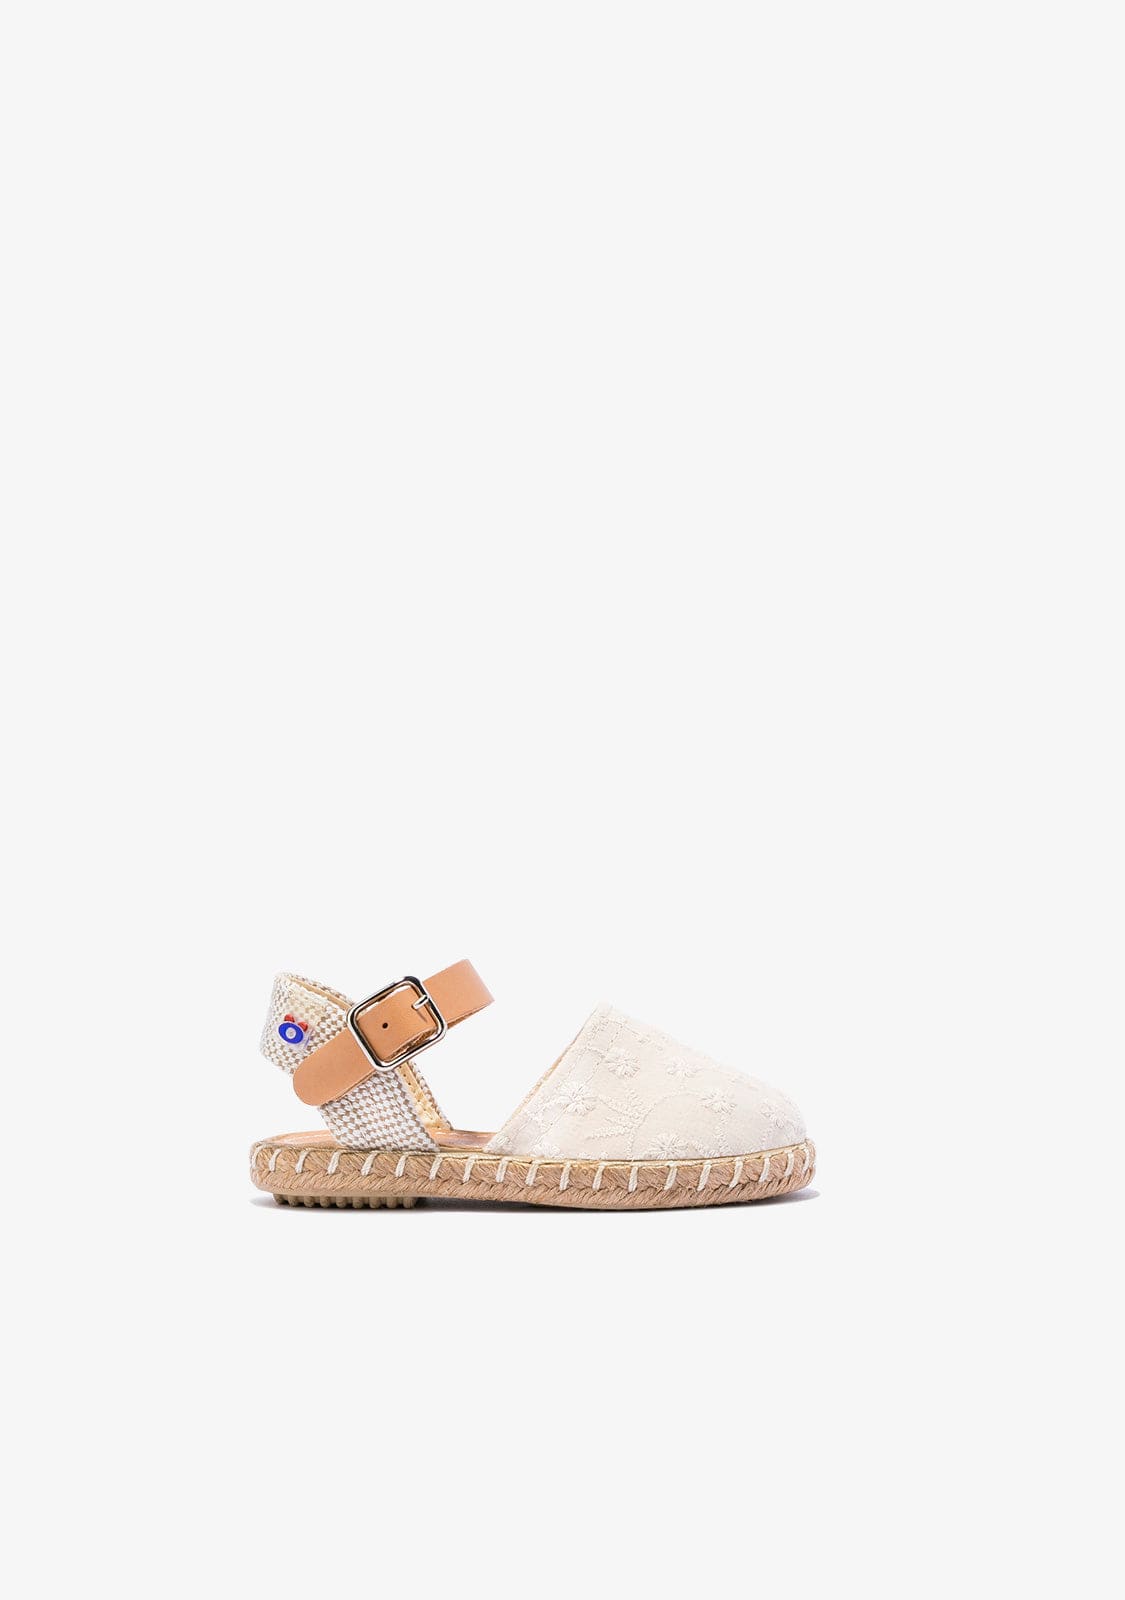 OSITO Shoes Baby's Beige Embroidery Espadrilles